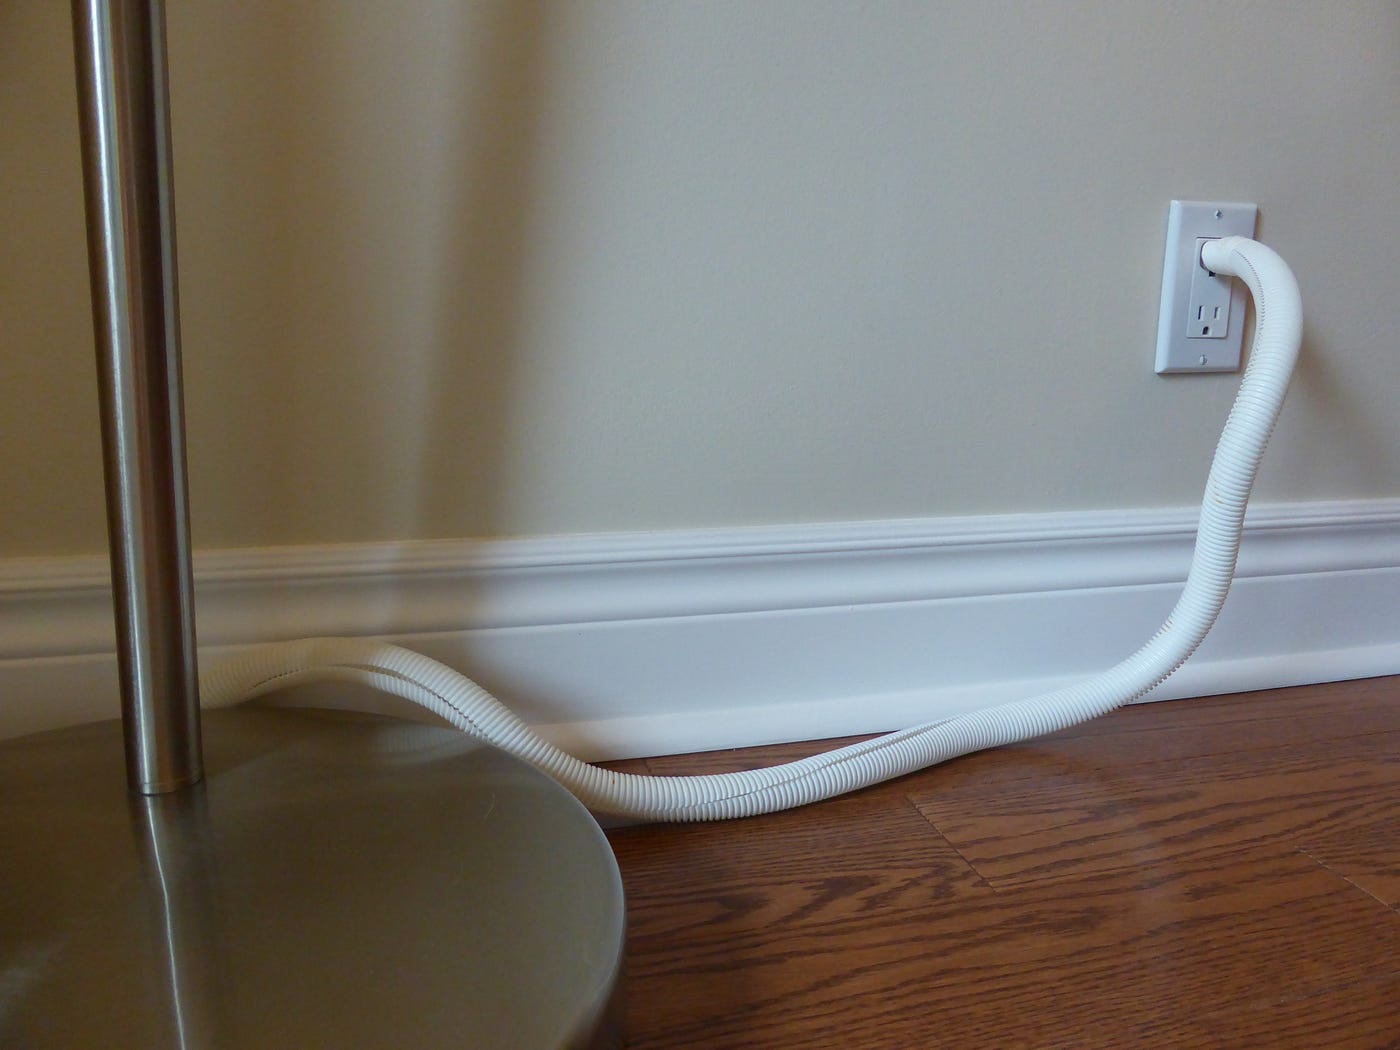 How I cat-proofed my electrical wires and phone cords | by Kate Kalcevich |  Medium